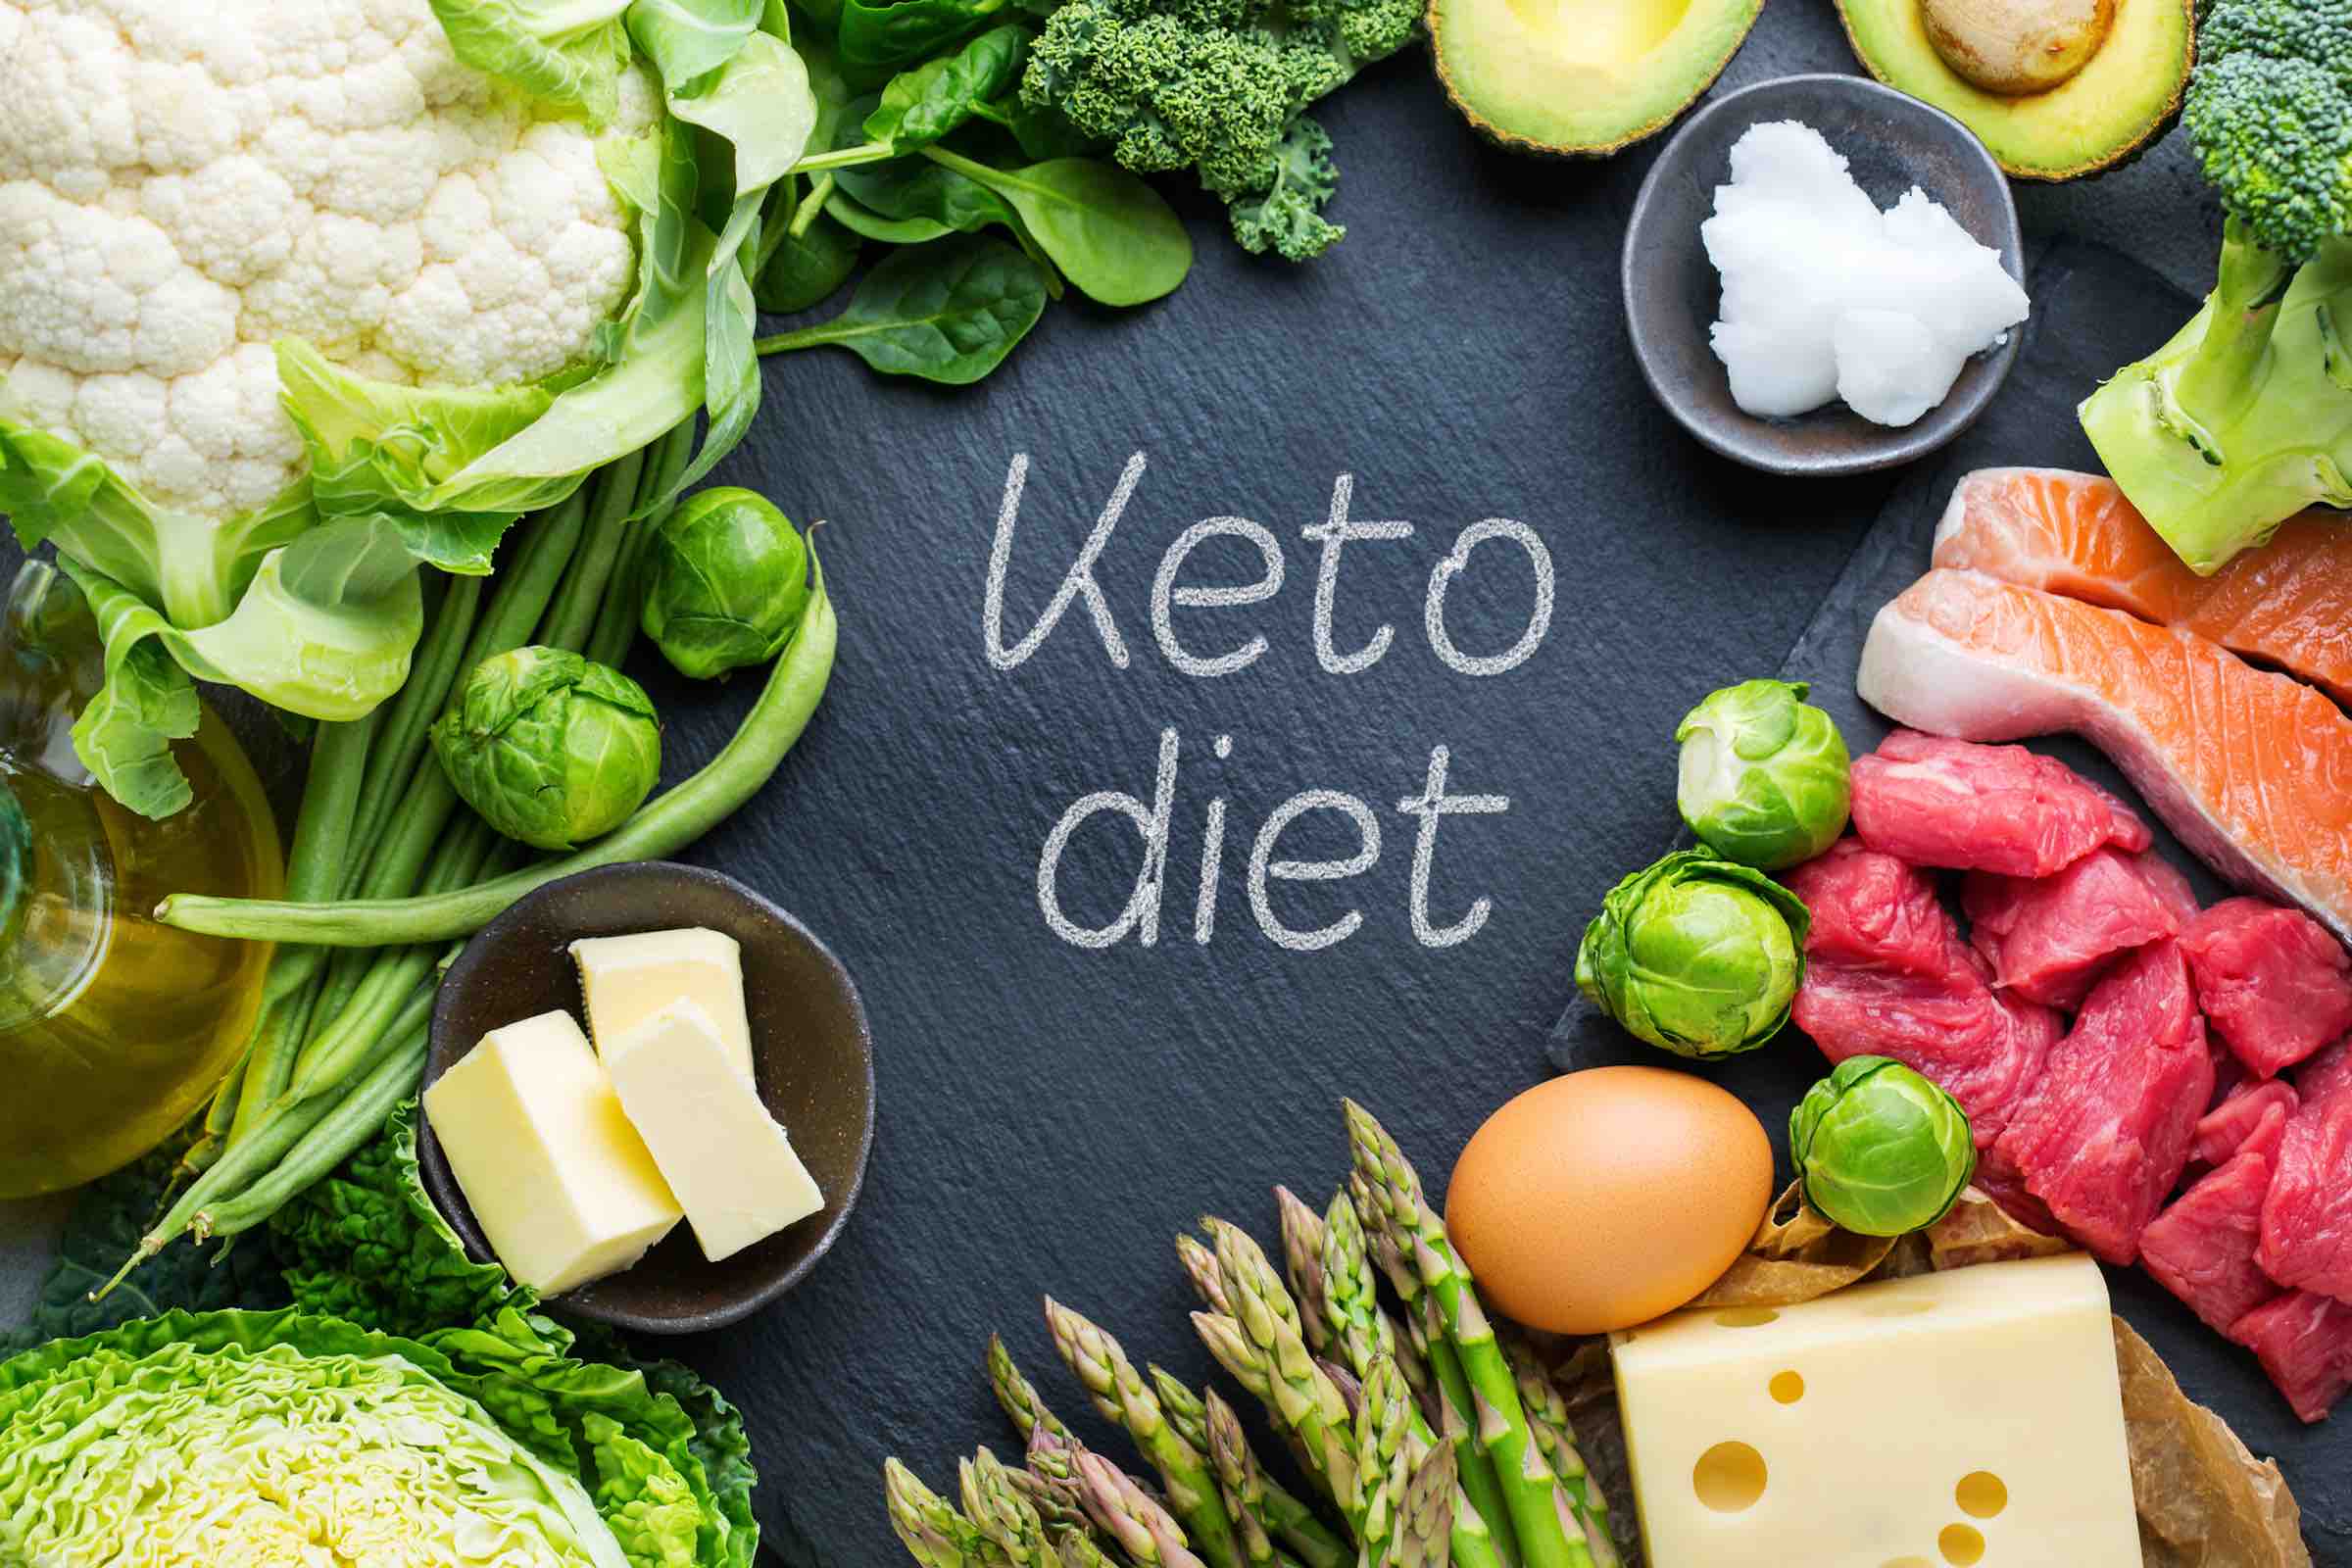 Is the keto diet healthy? These memes say yes - yes it is ...